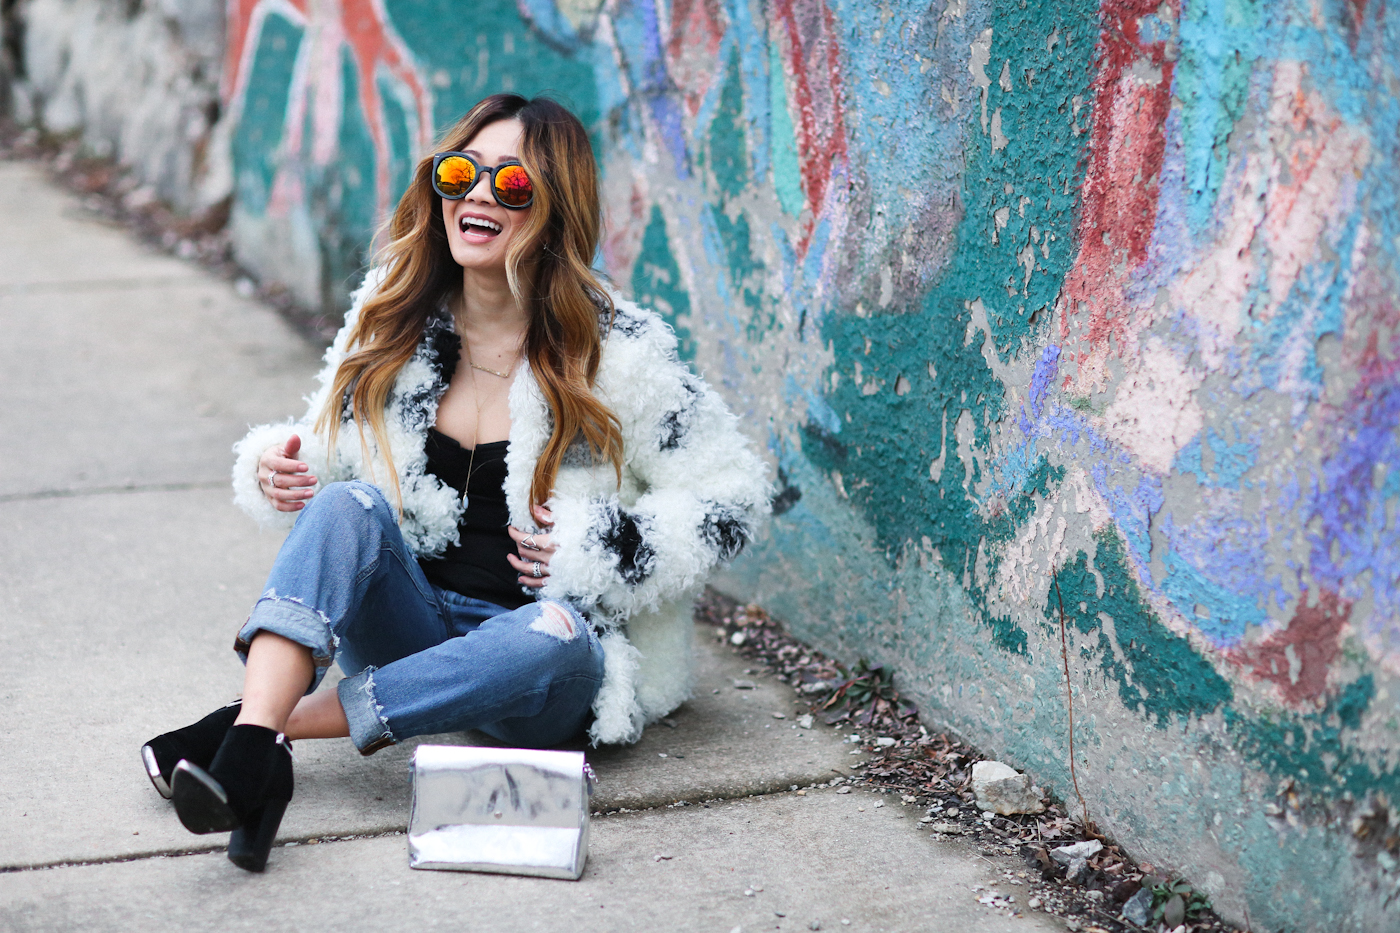 corset top and curly faux fur coat with reflective sunglasses and ripped jeans